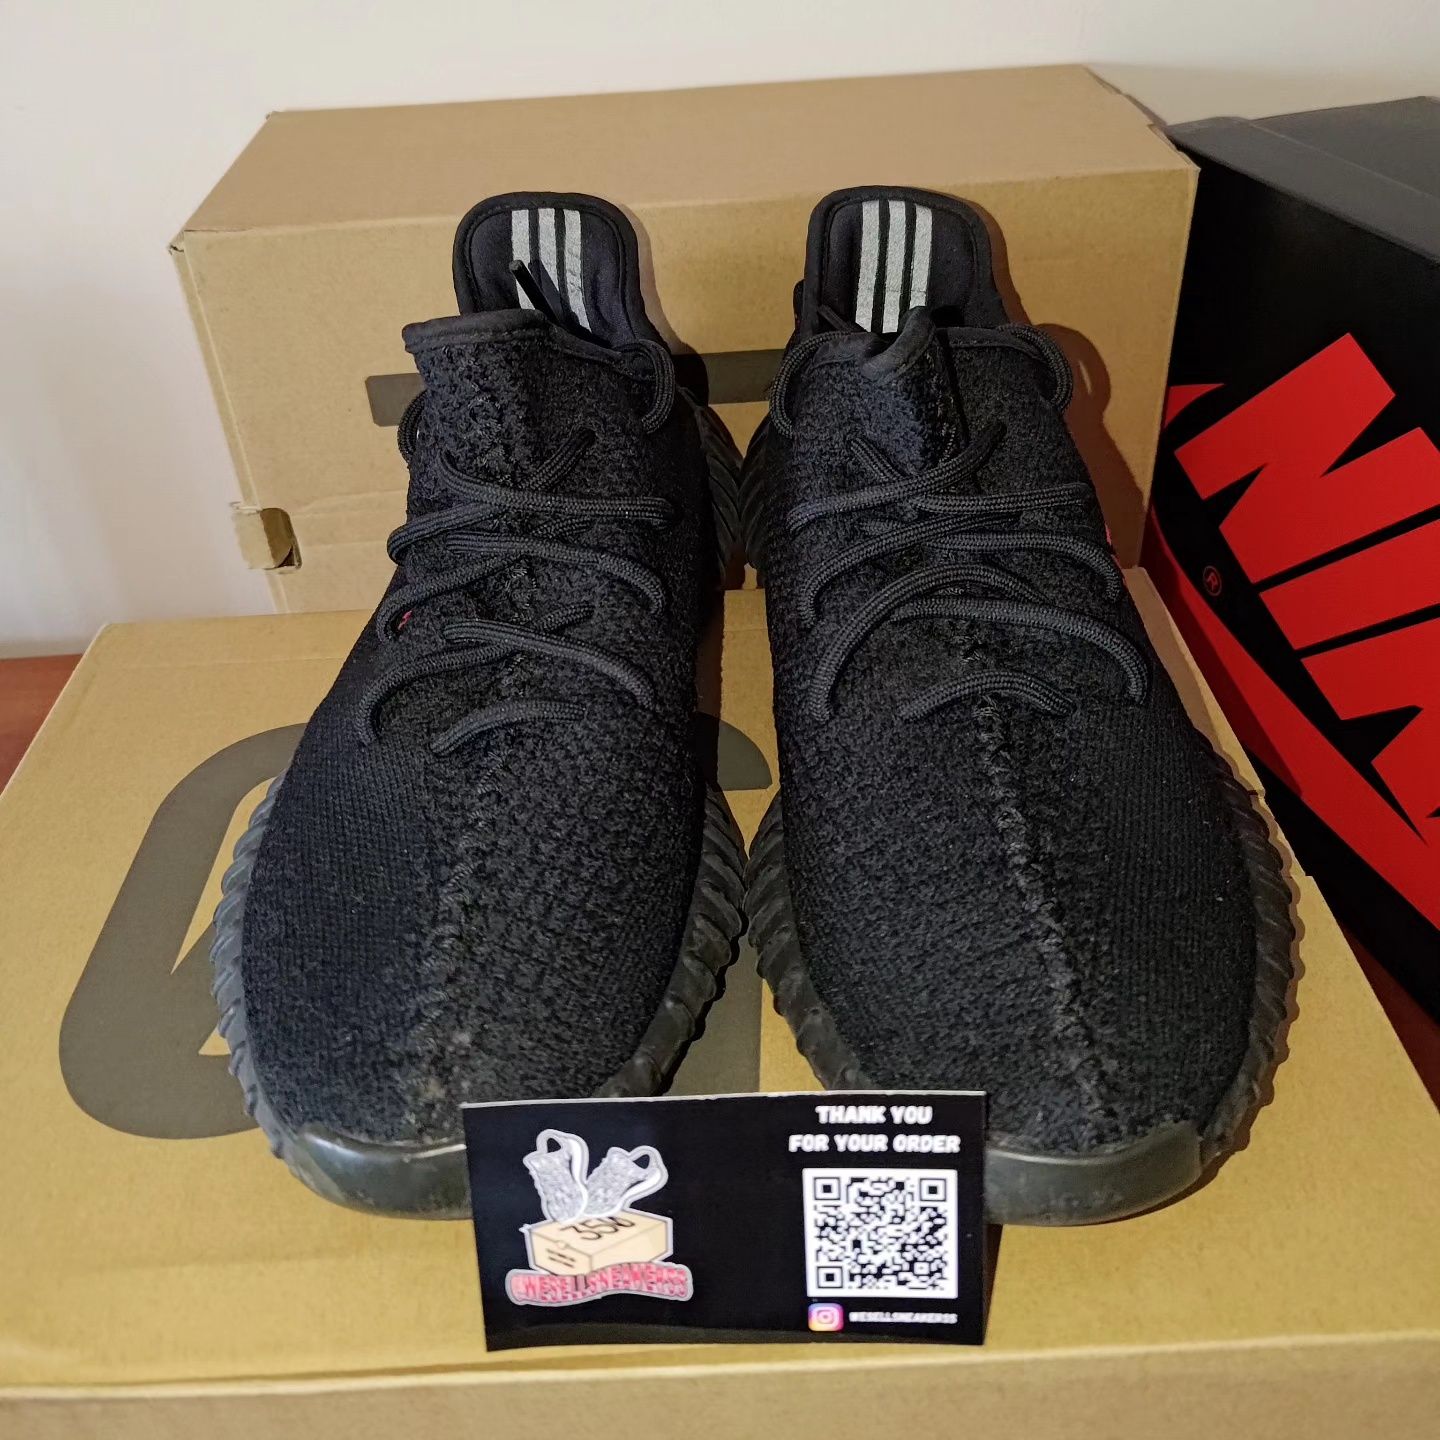 Yeezy 350 bred size 43